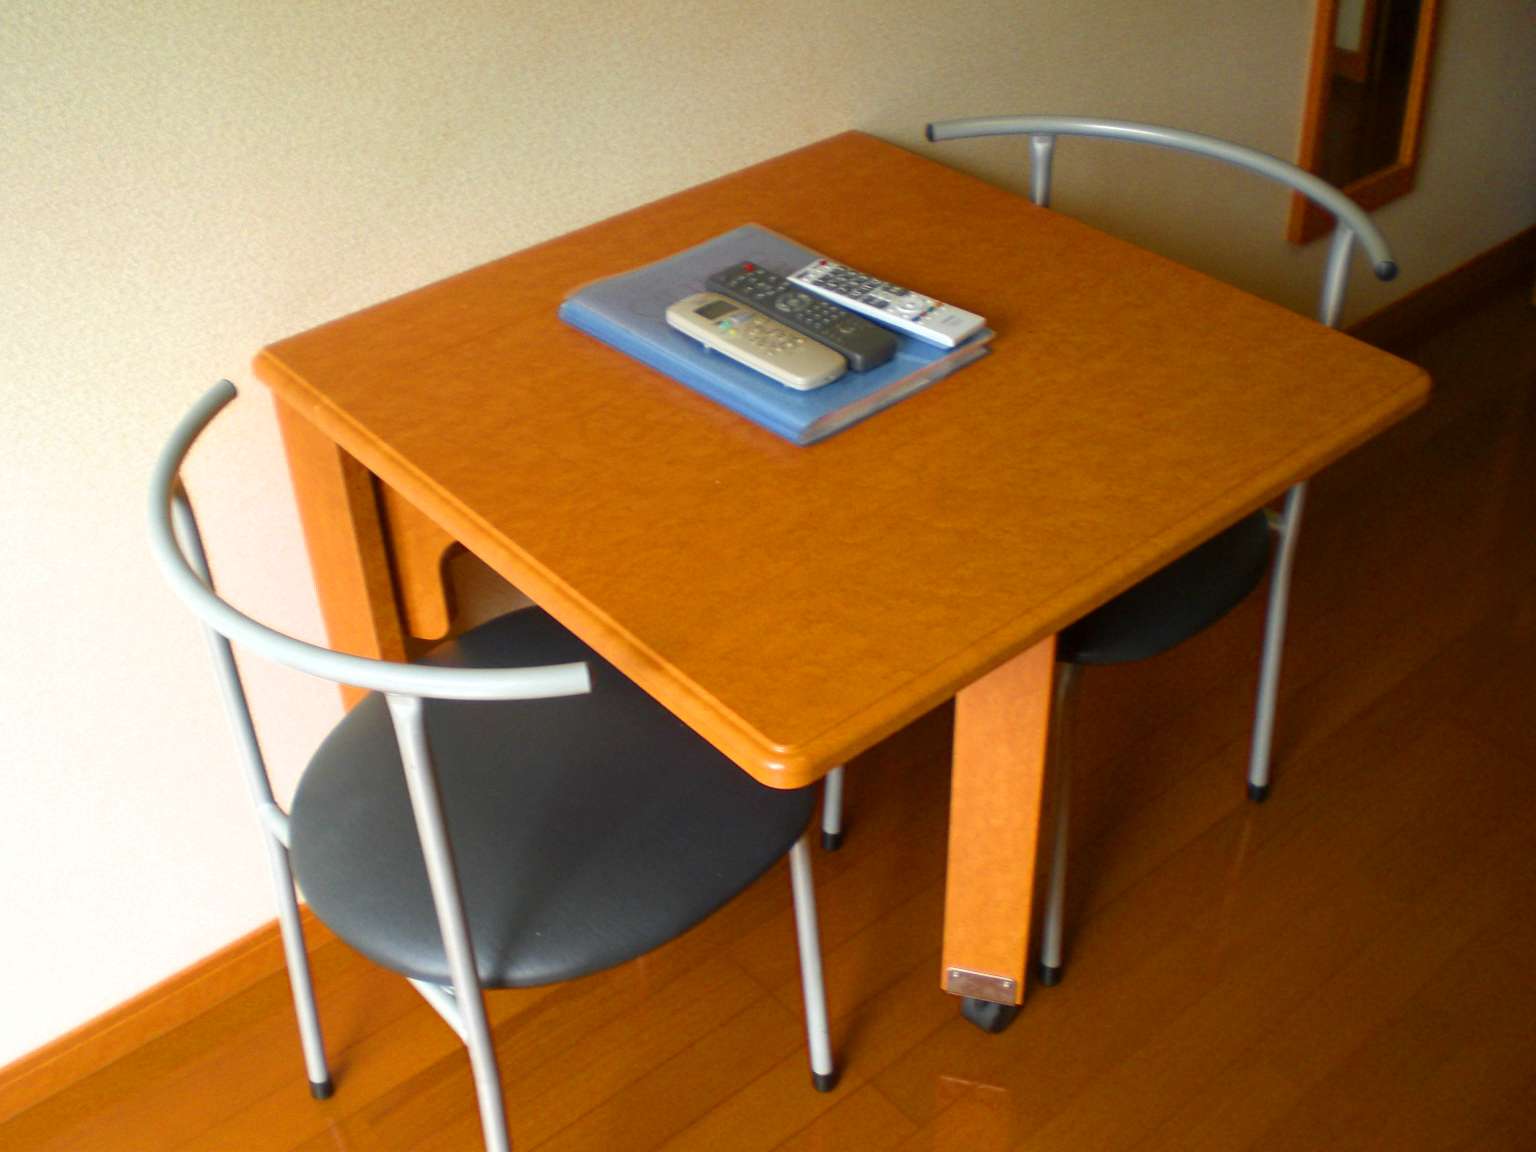 Other. table ・ Chair is also equipped